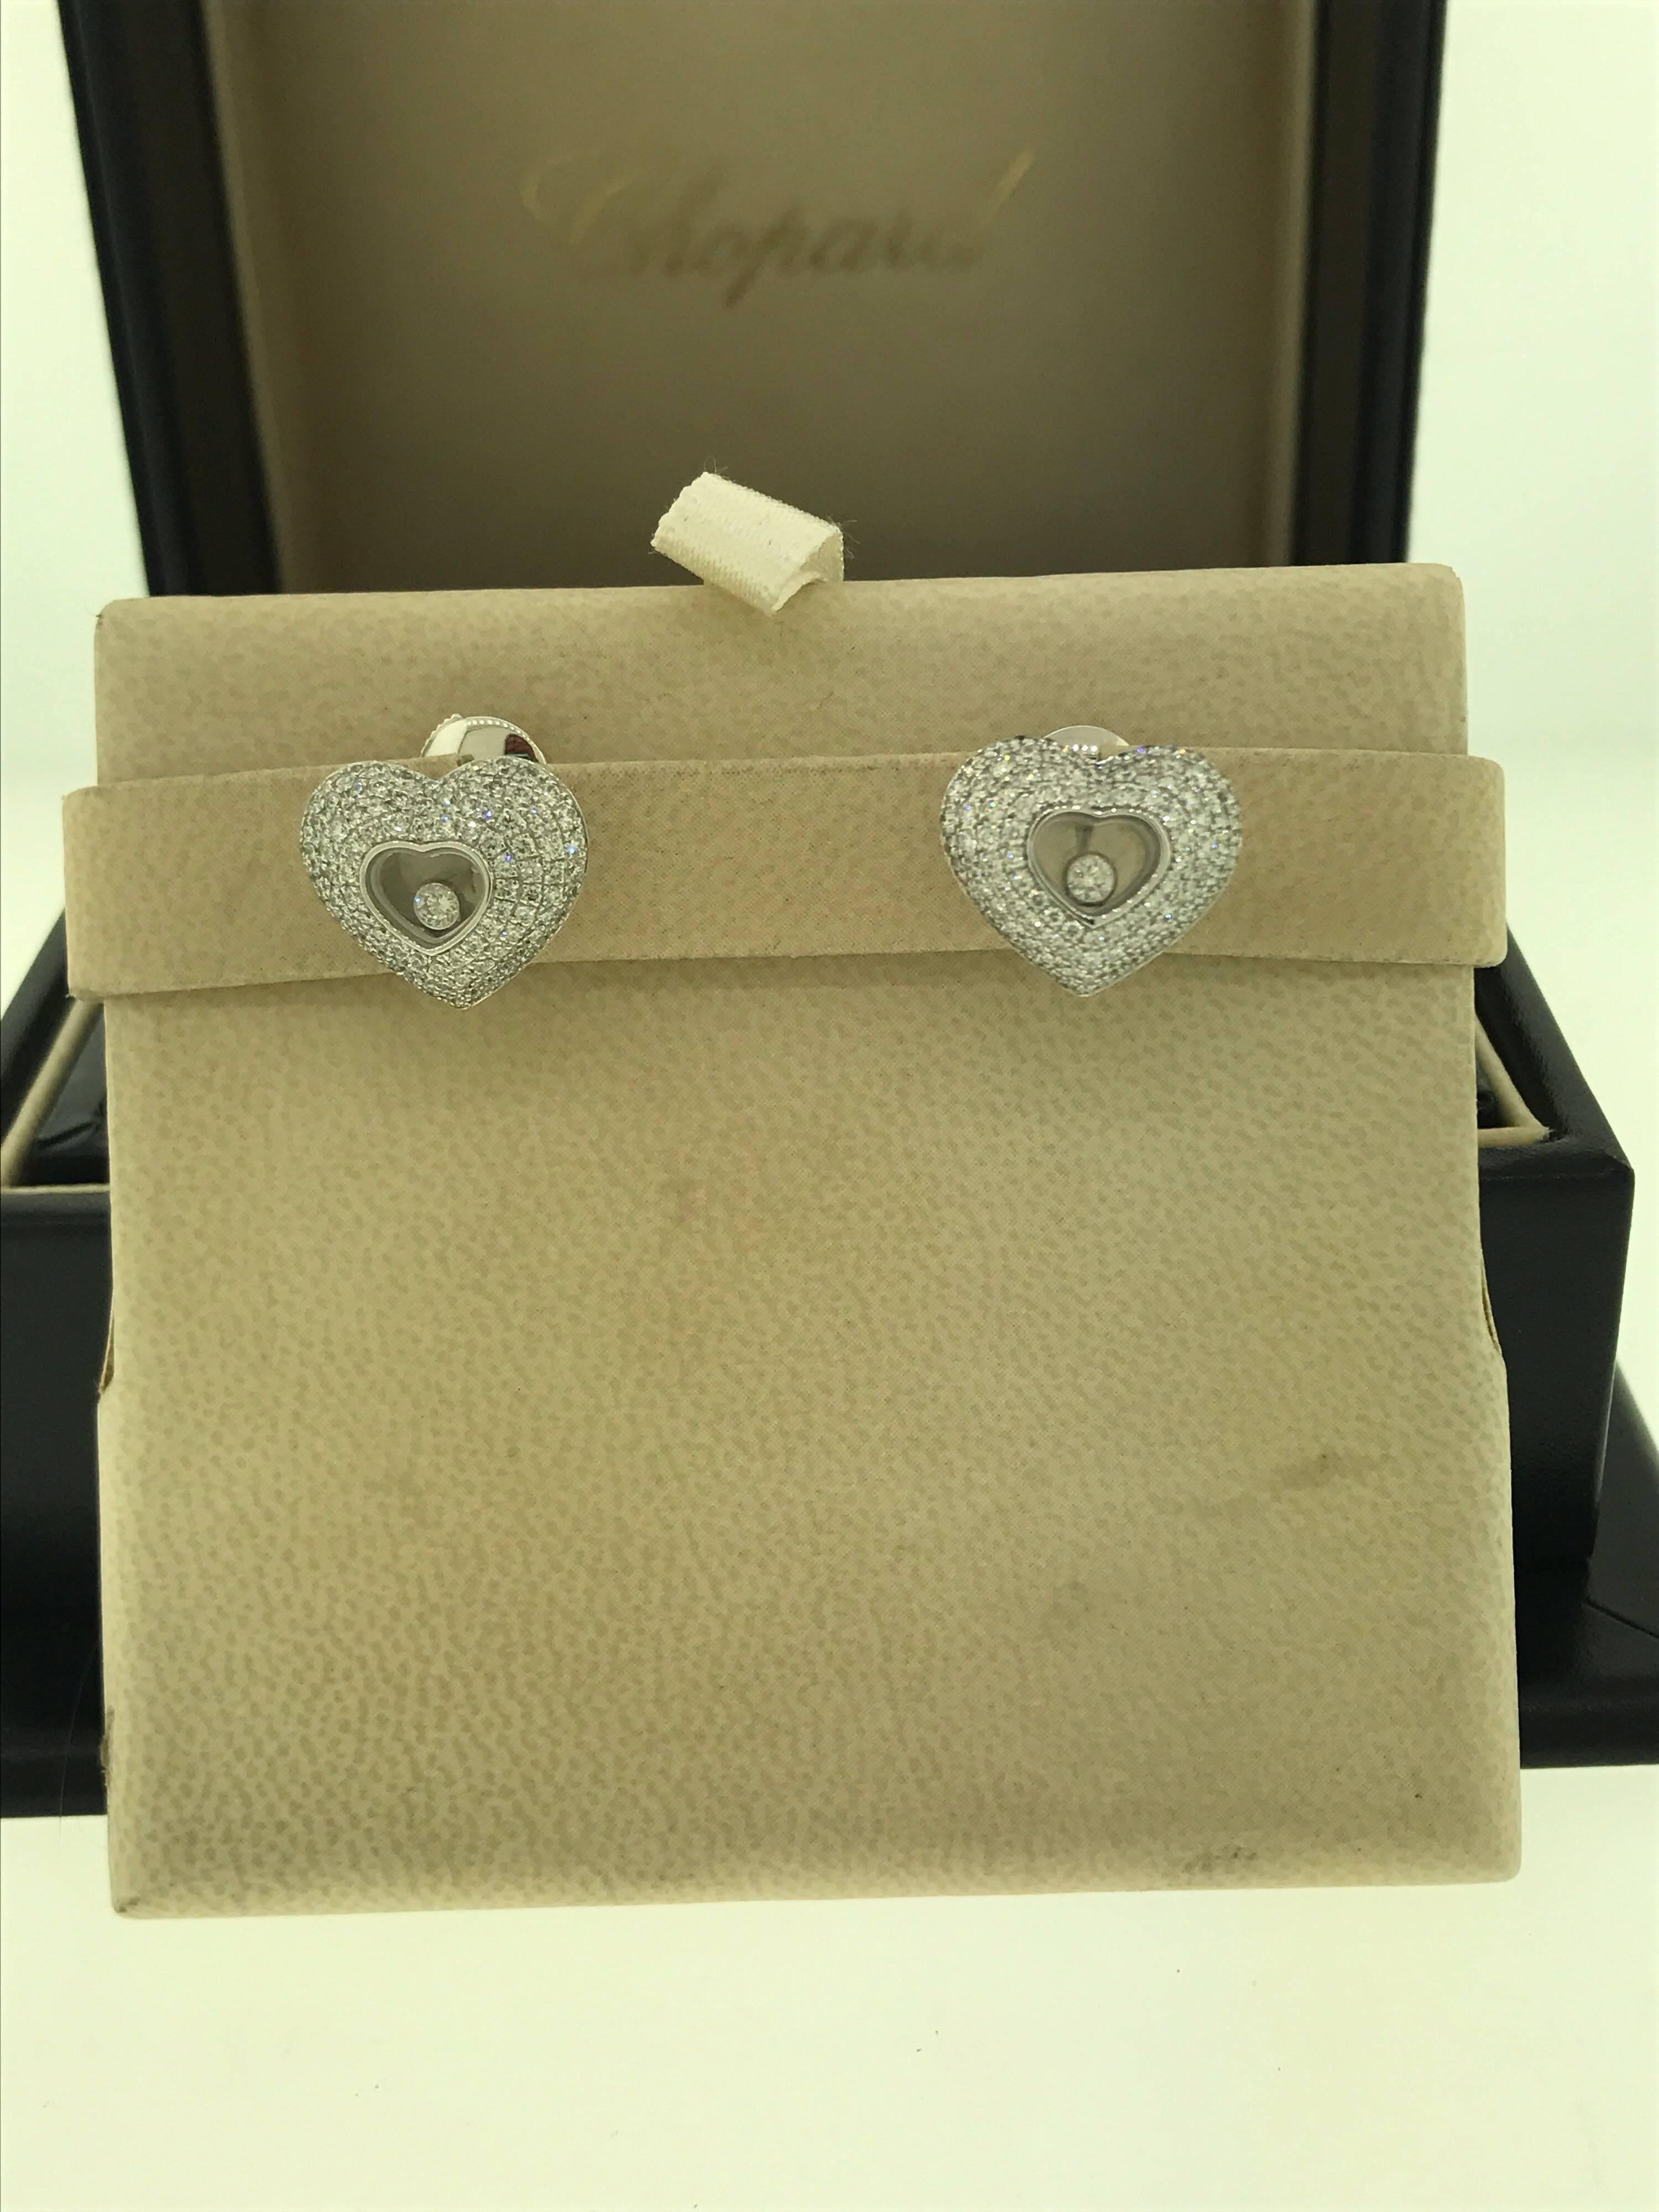 Chopard Happy Diamonds Hearts Earrings

Model Number: 83/7417-1001

100% Authentic

Brand New

Comes with original Chopard box, certificate of authenticity and warranty, and jewels manual

18 Karat White Gold (6.70gr)

214 Diamonds total on the